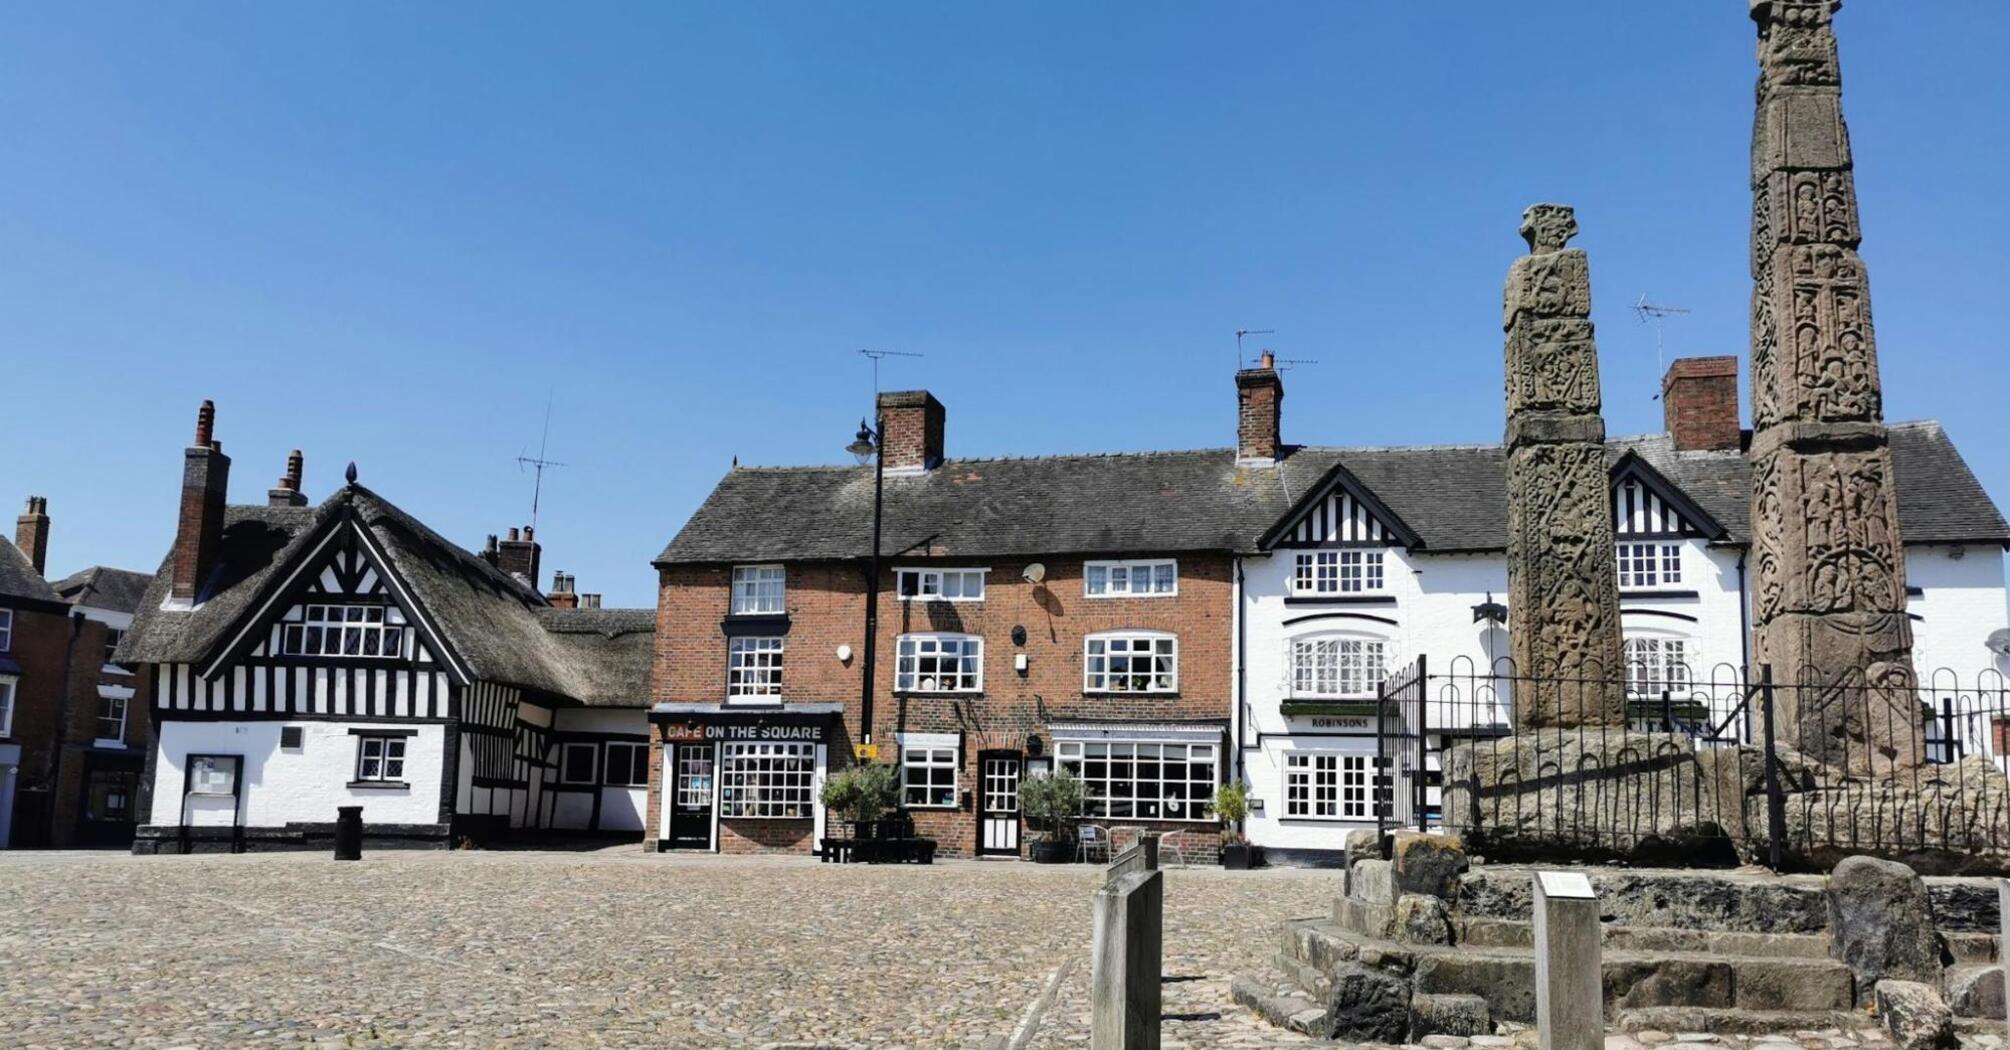 Historic town square in Cheshire East with old buildings and stone monuments